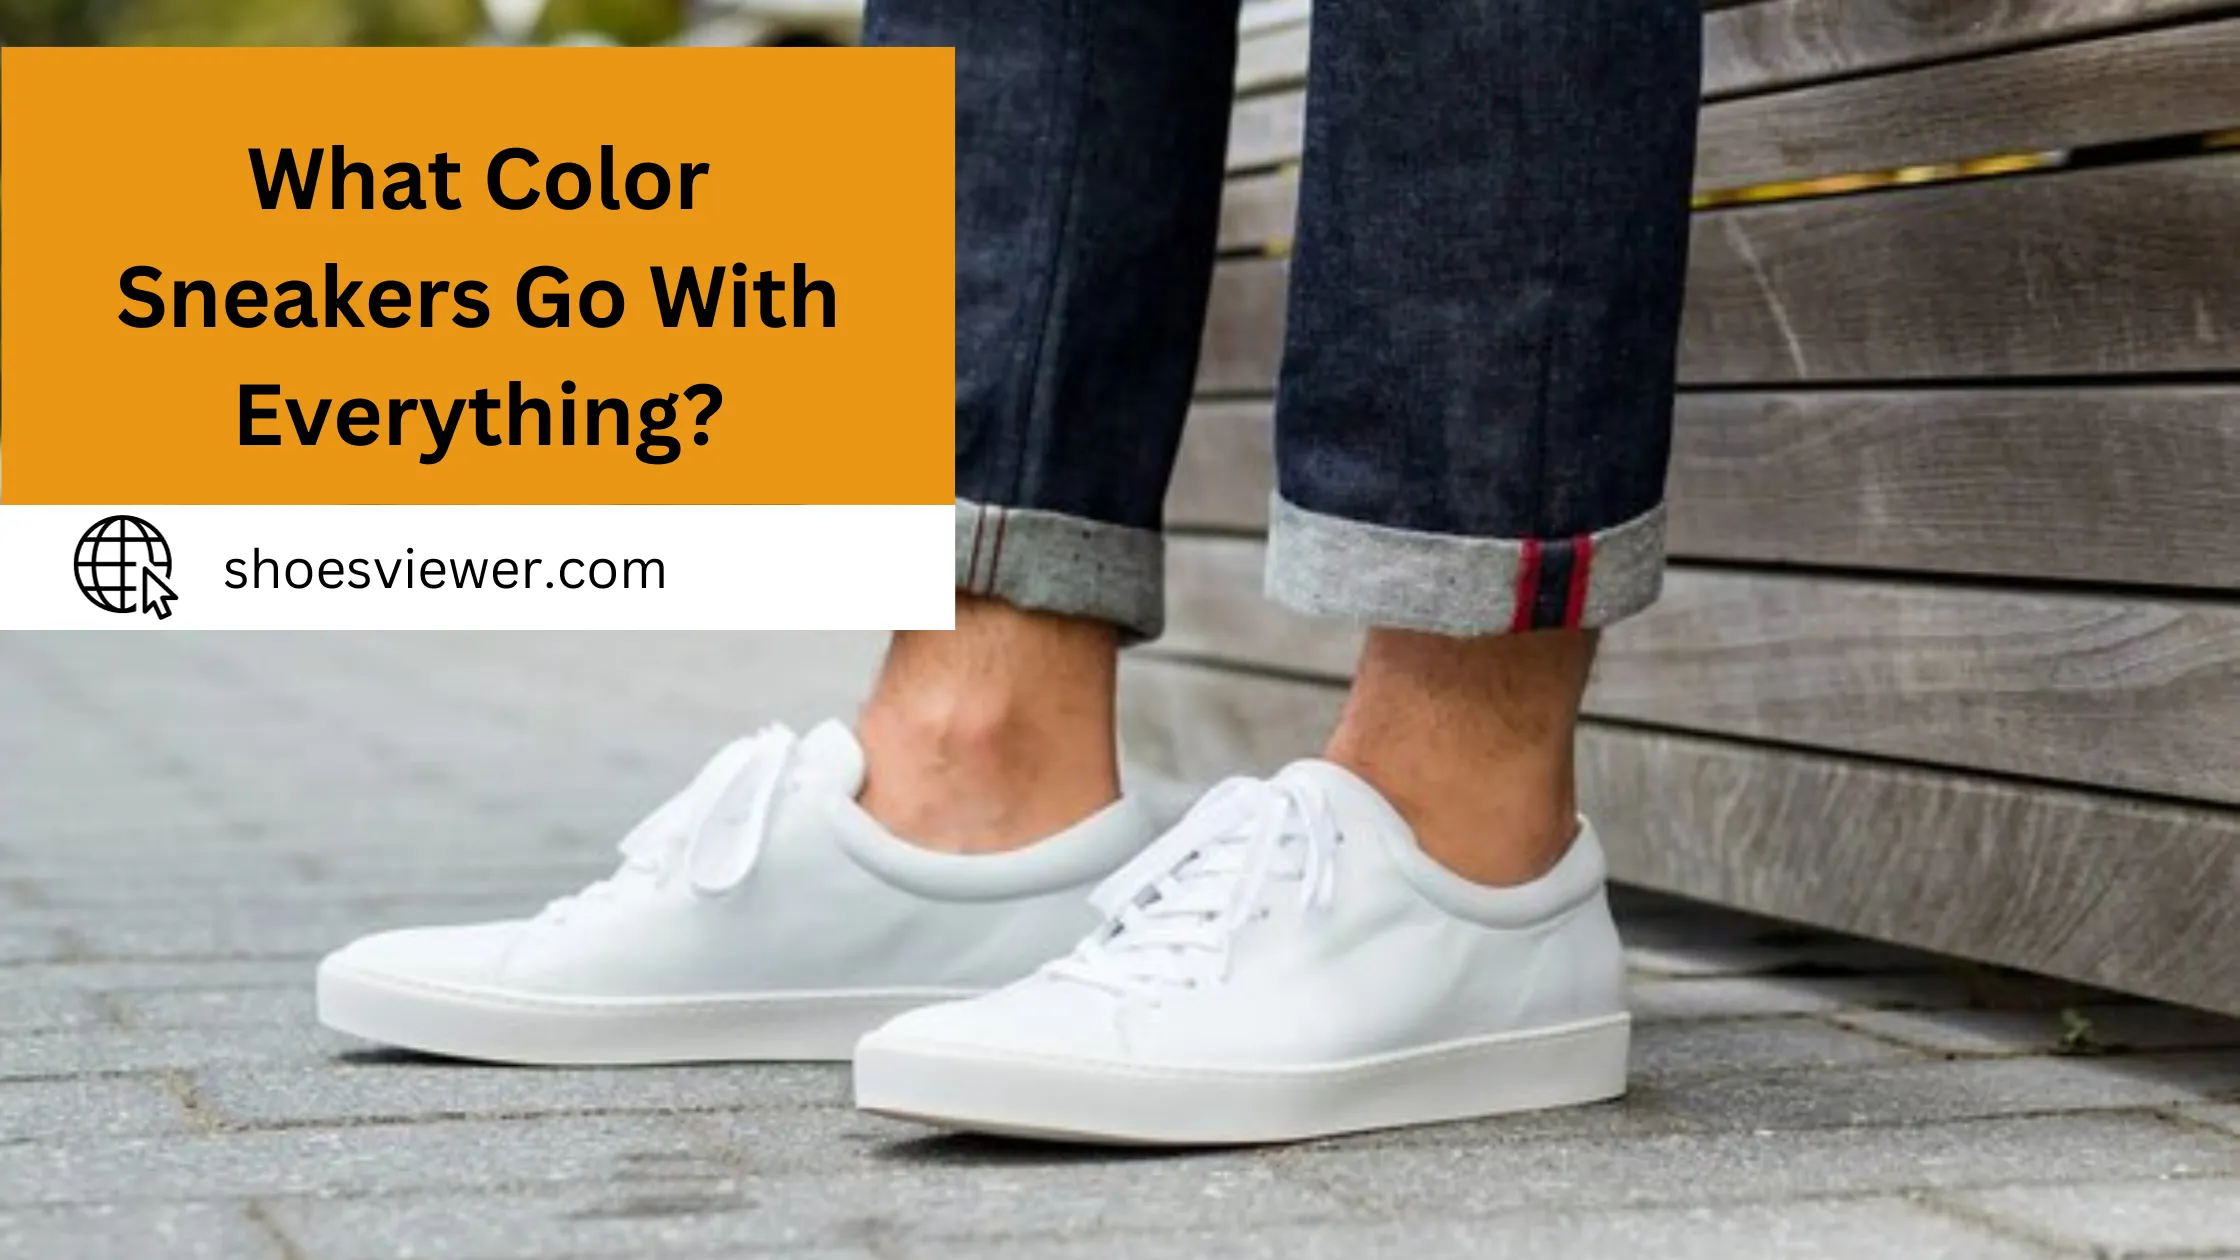 What Color Sneakers Go With Everything? (An In-Depth Guide)